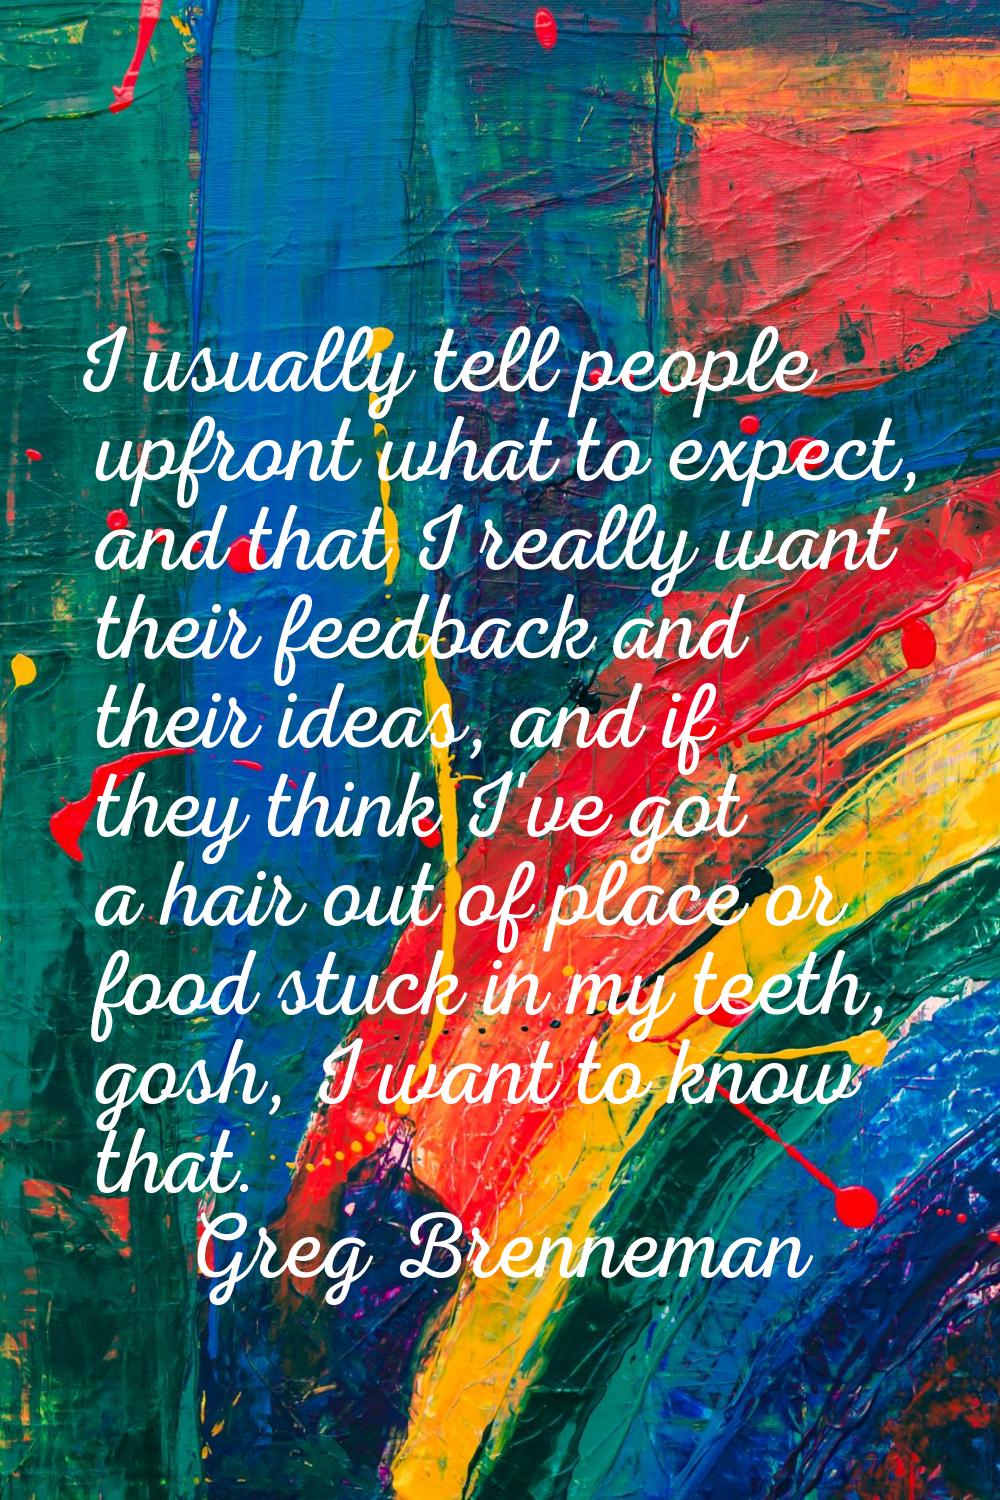 I usually tell people upfront what to expect, and that I really want their feedback and their ideas